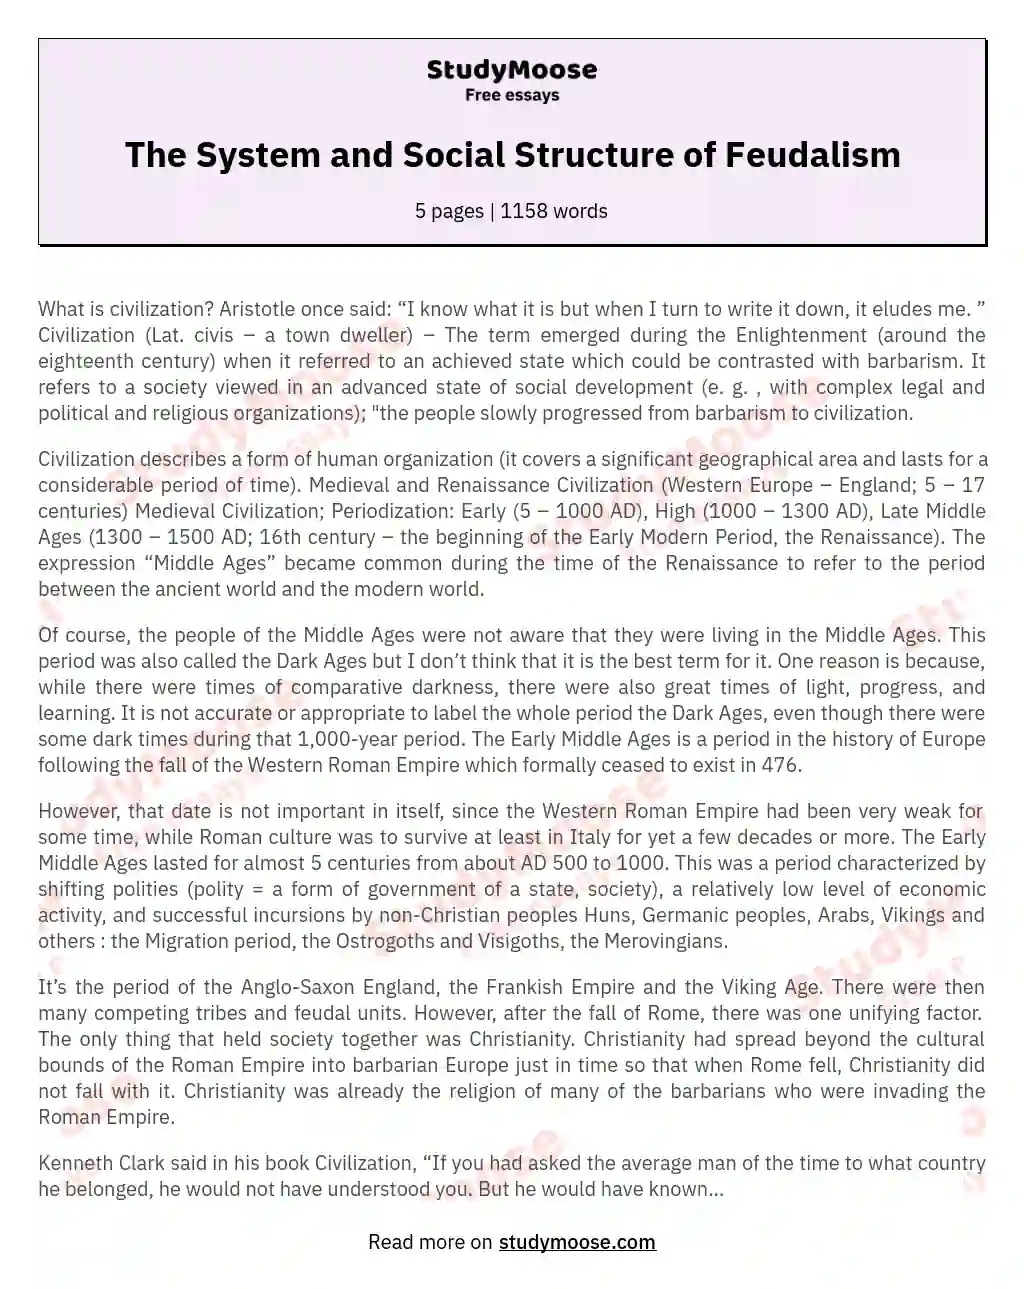 The System and Social Structure of Feudalism